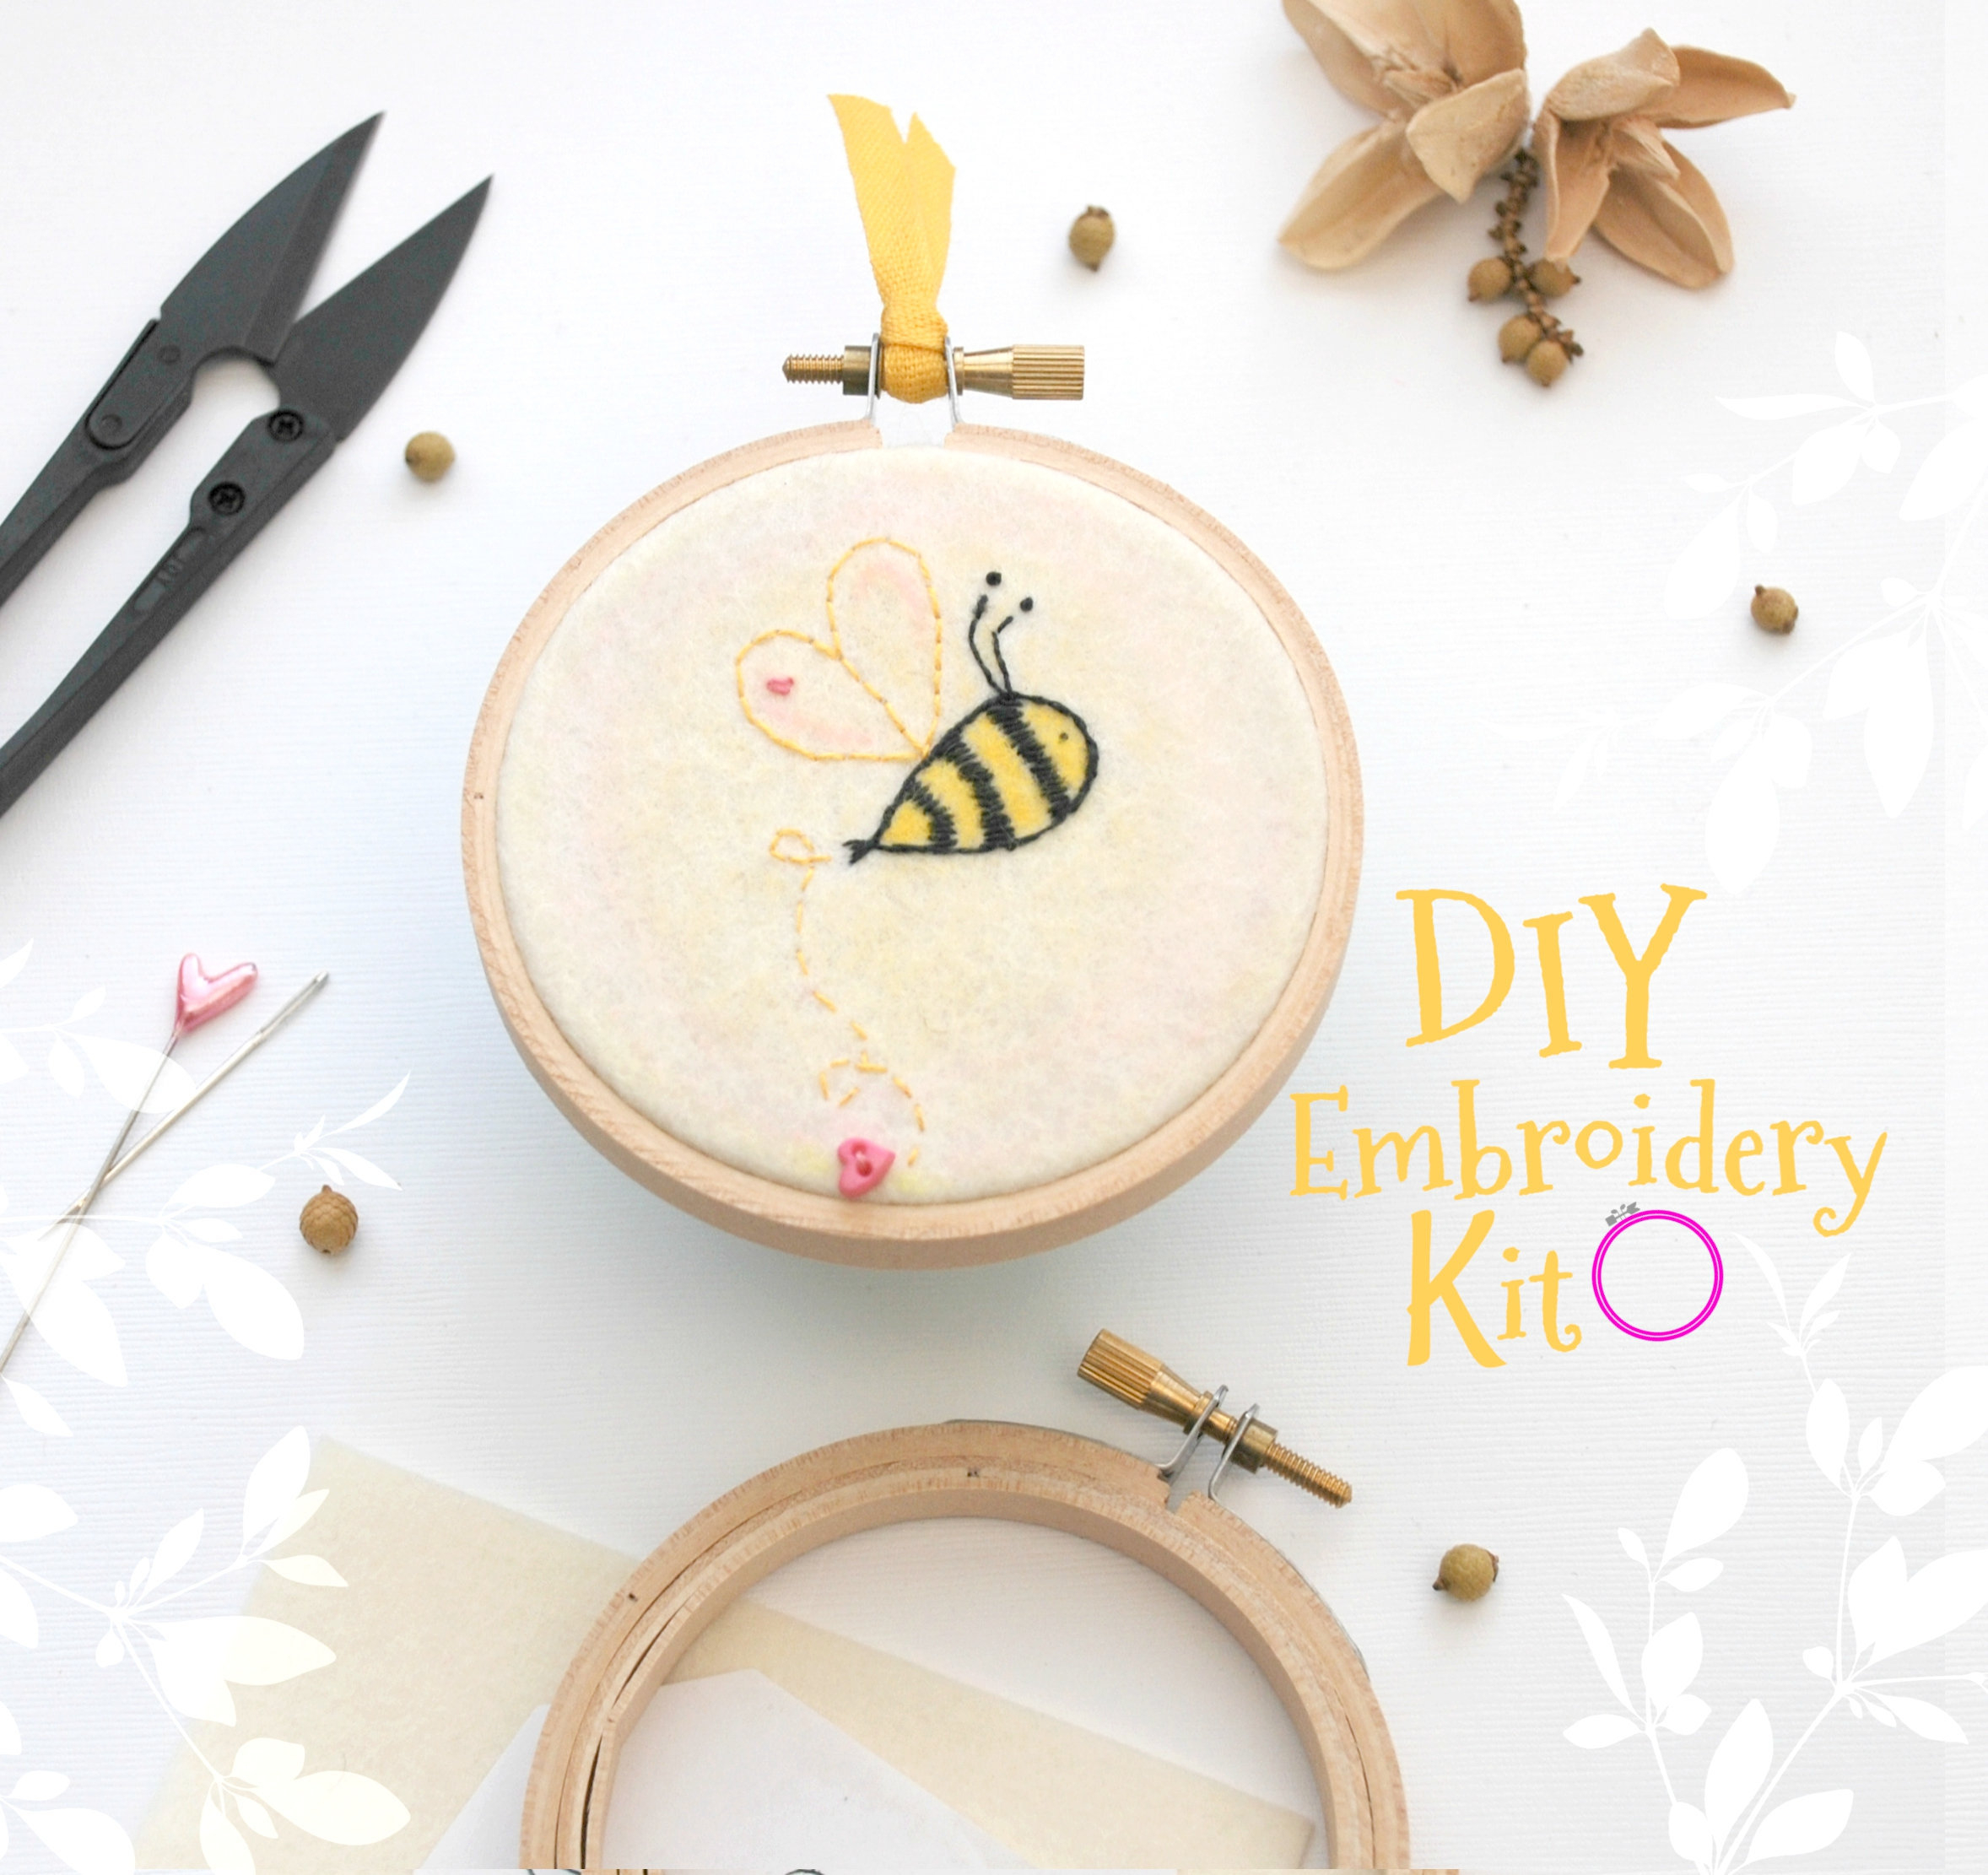 Bumble Bee Embroidery Pattern Bumblebee Embroidery Patterns Diy Embroidery Kit Kids Cute Stitching Patterns Diy Beginners Stitching Kit Iron On Bumblebee Diy